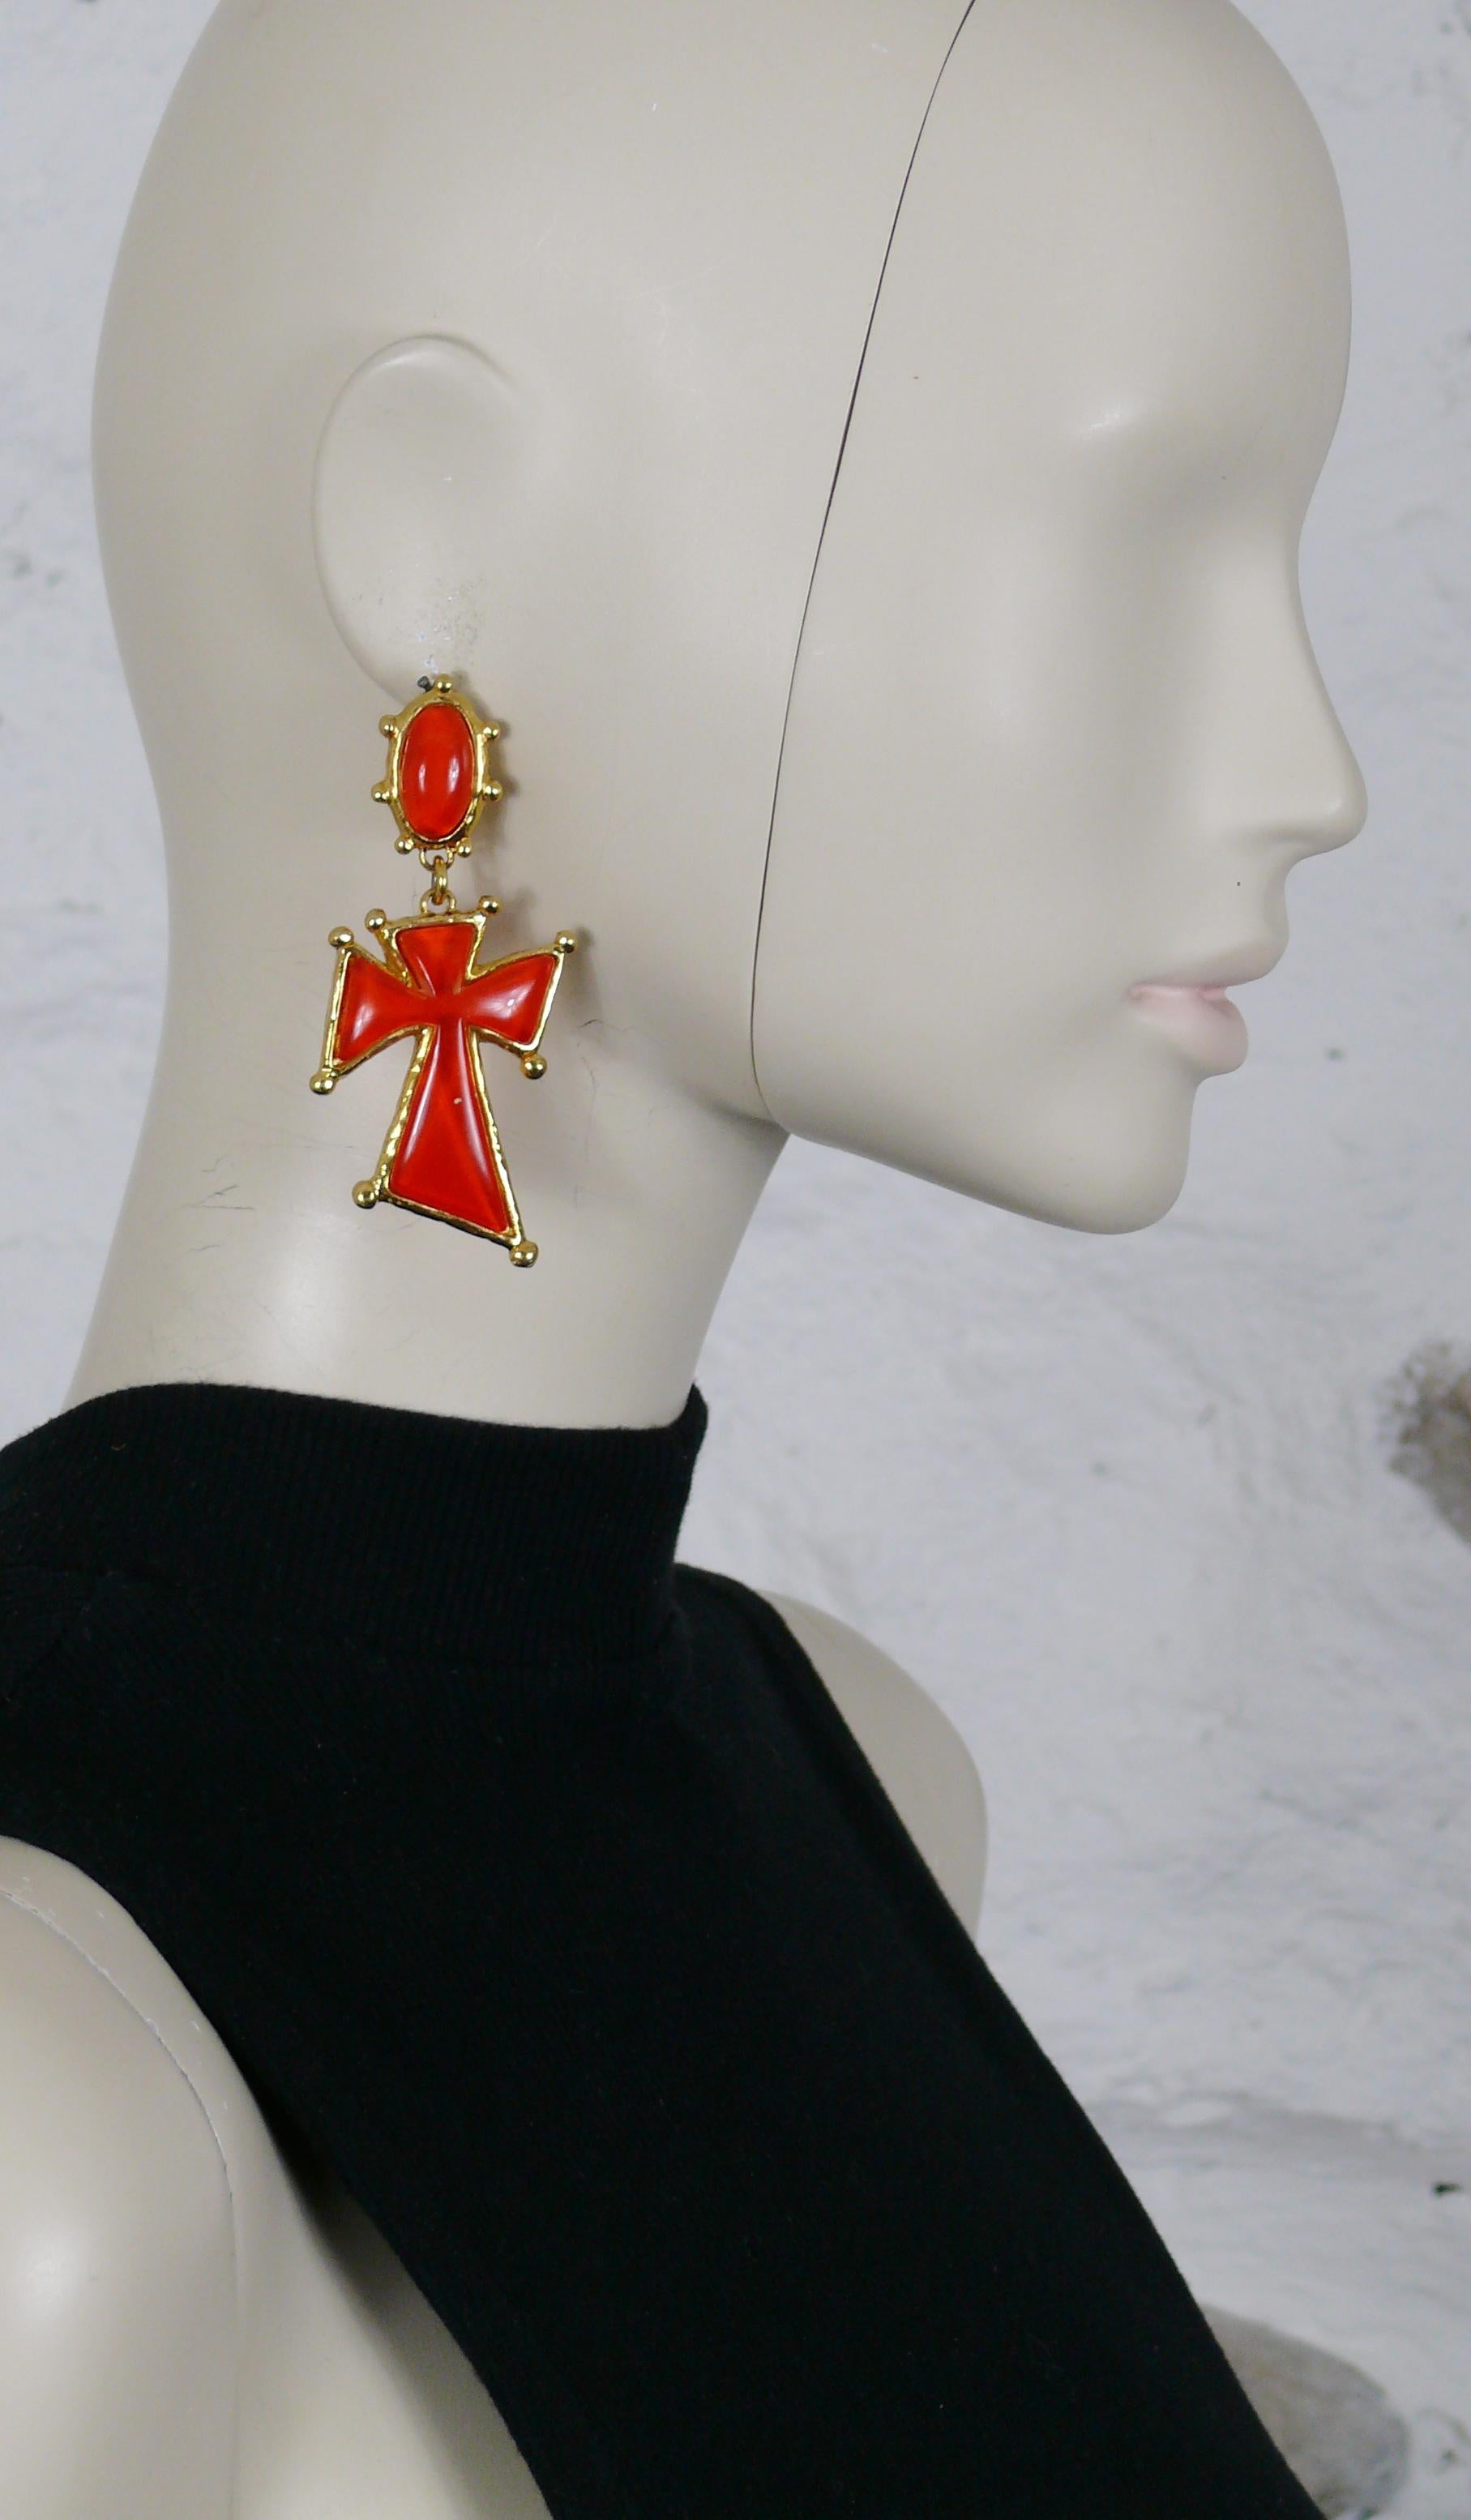 CHRISTIAN LACROIX gold toned dandling earrings (clip-on) featuring an orange resin cabochon and cross.

Marked CHRISTIAN LACROIX E94 Made in France.

Indicative measurements : max. length approx. 7.5 cm (2.95 inches) / max. width approx. 3.4 cm